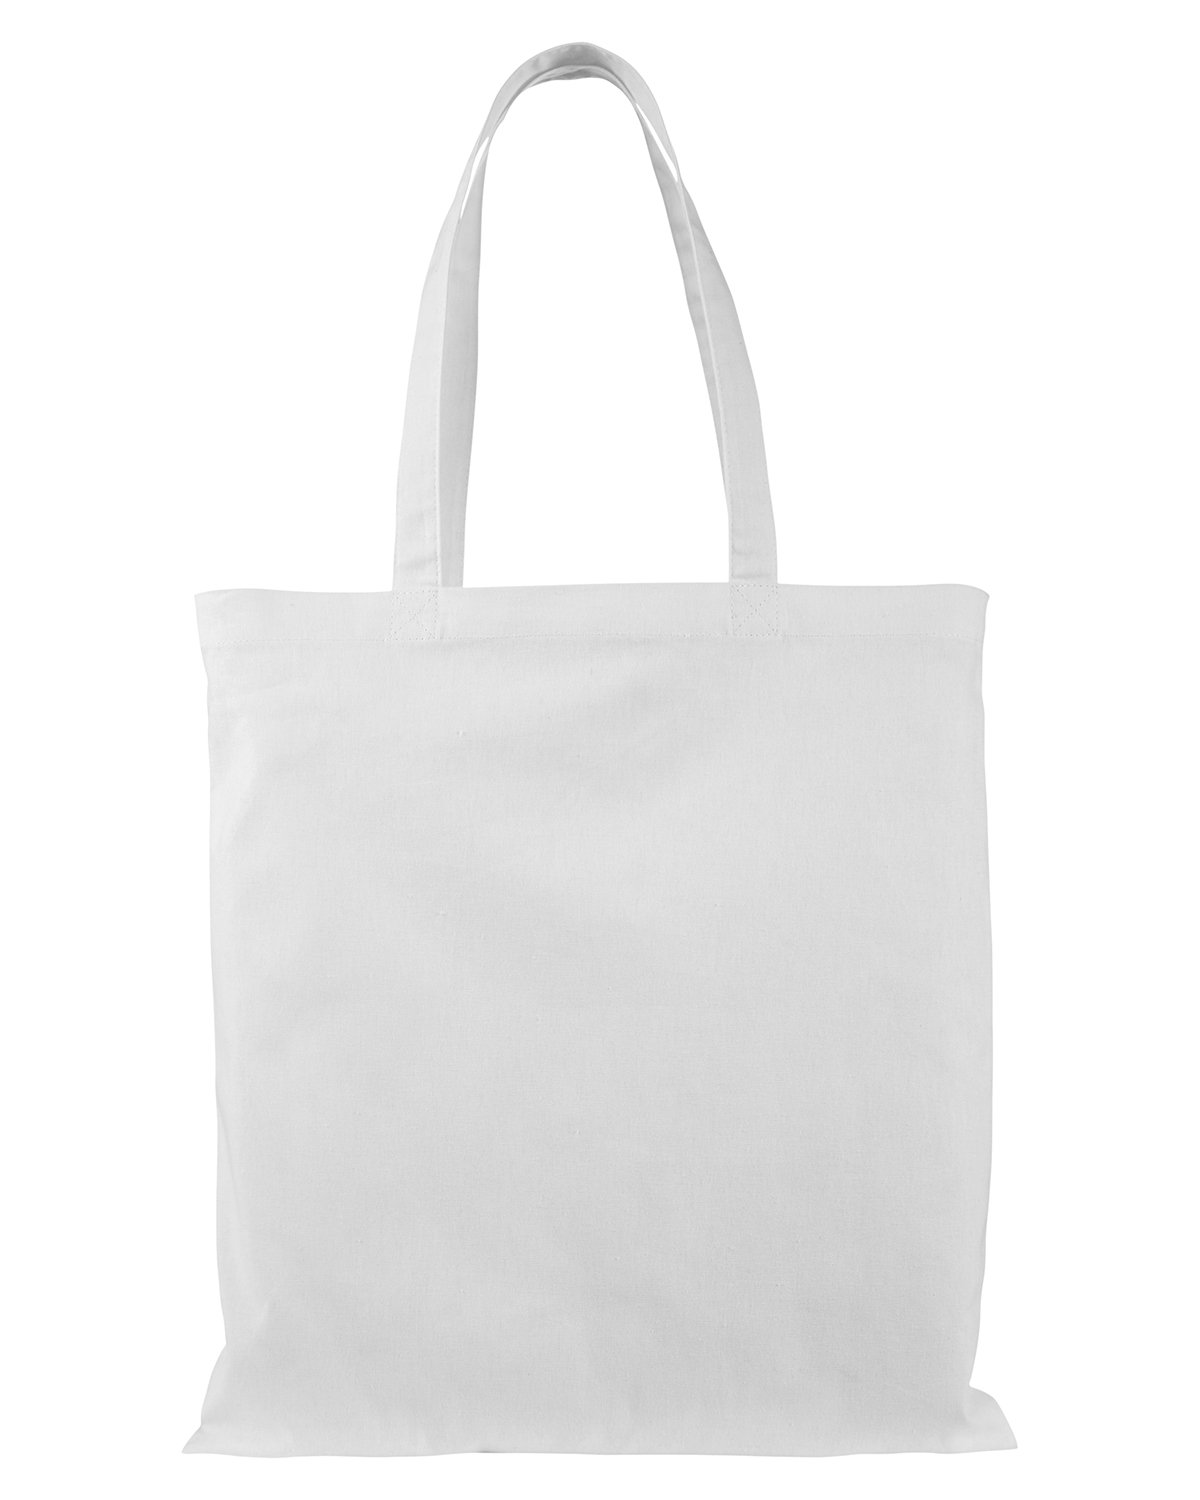 Front view of 6 Oz. Canvas Promo Tote